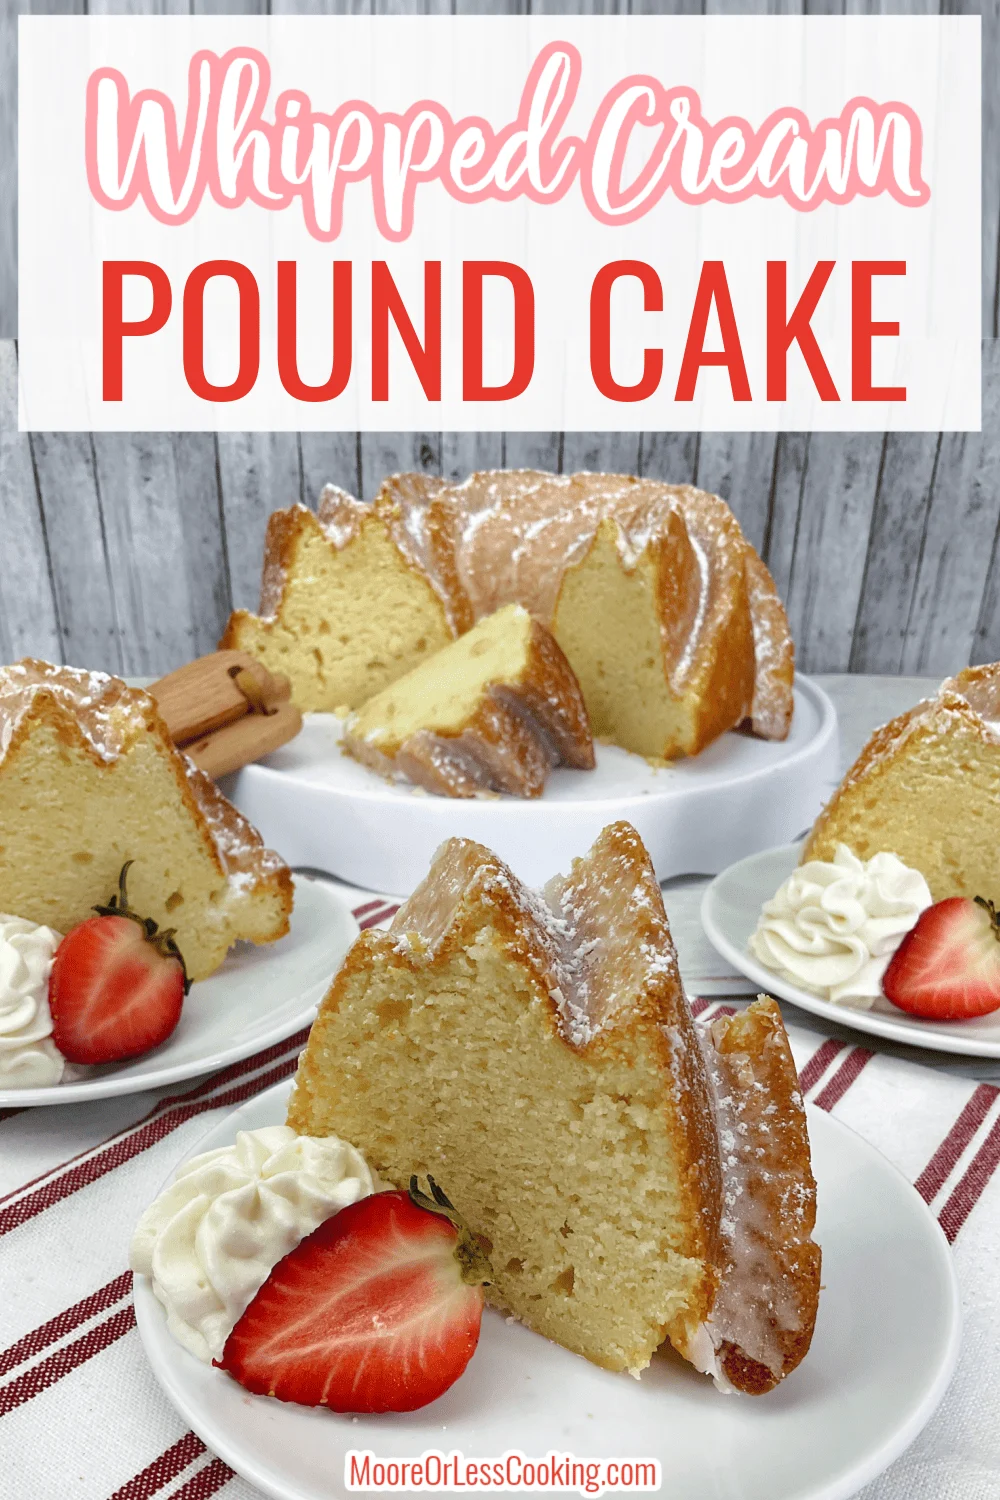 Whipped Cream Pound Cake - Moore or Less Cooking